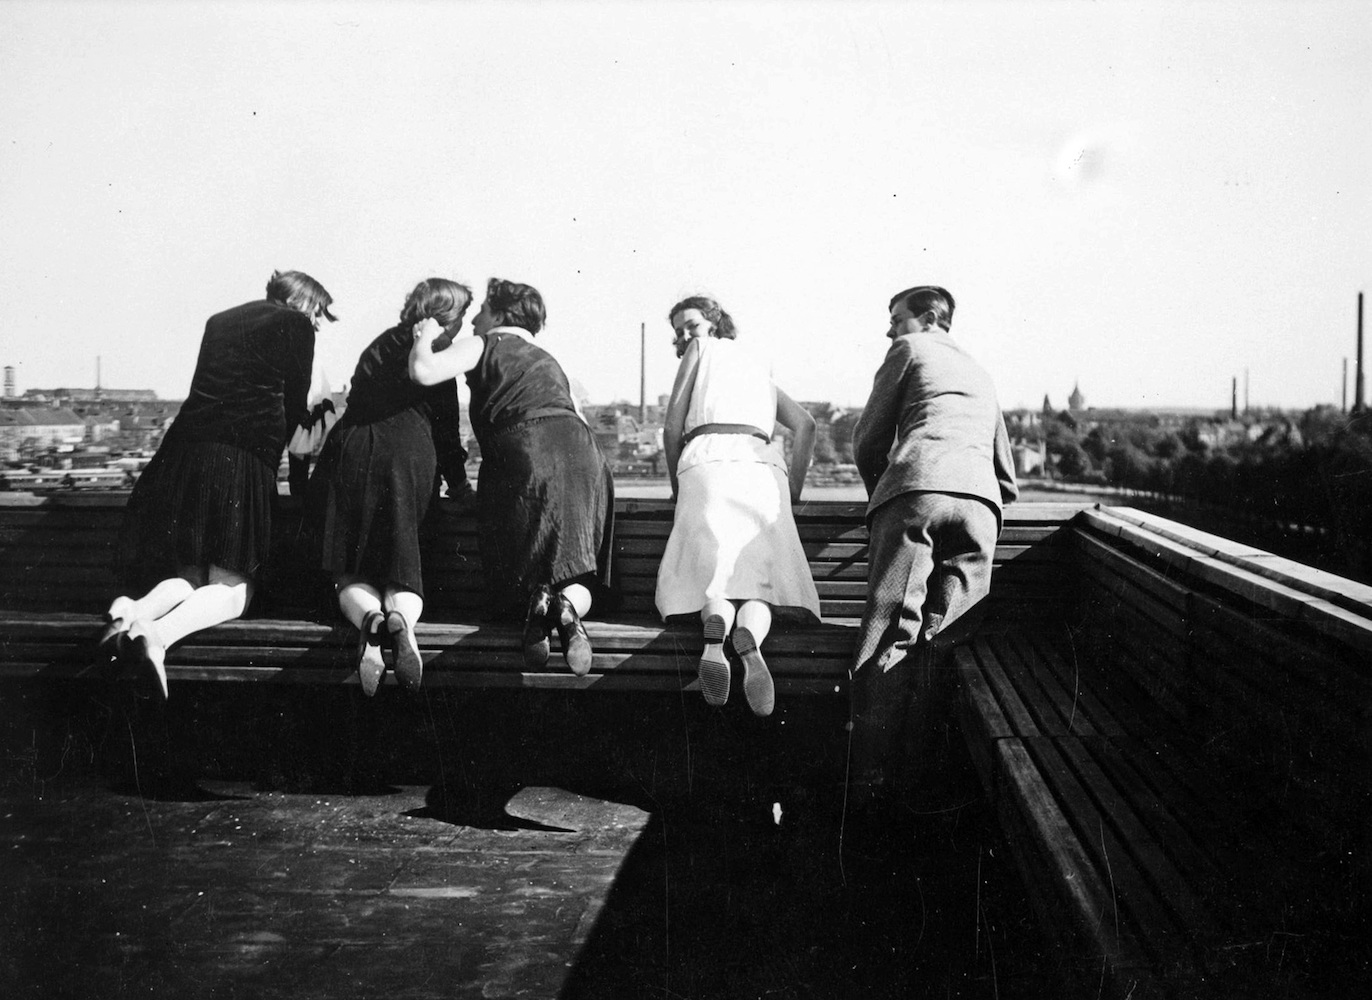 Group kneeling on seats on the Bauhaus Roof, rear View